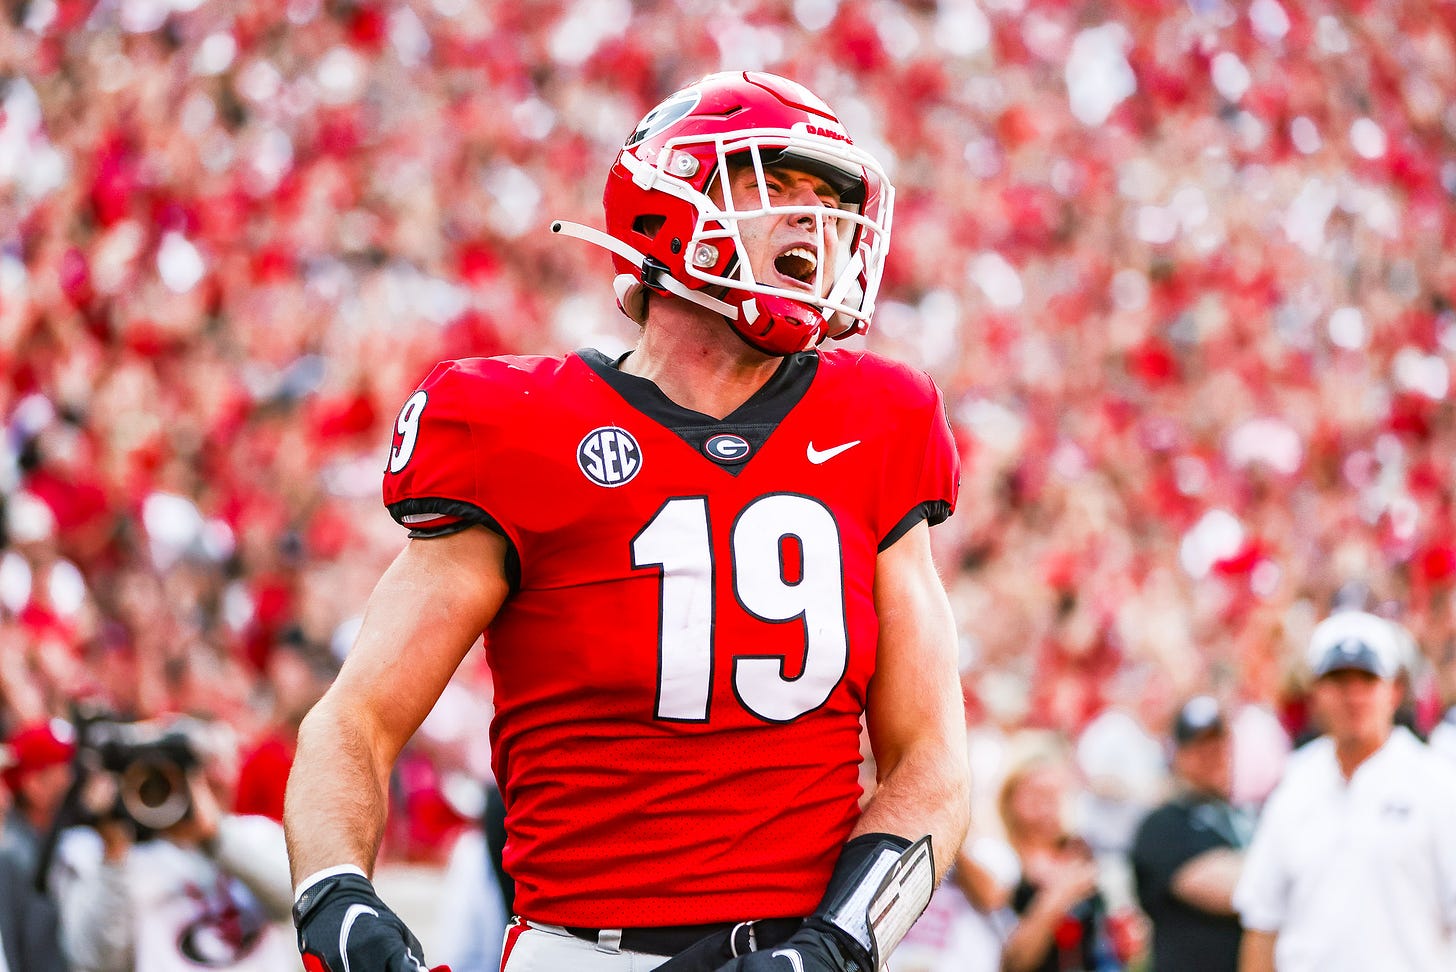 Georgia tight end Brock Bowers (19) during the Bulldogs’ game against Kentucky on Dooley Field at Sanford Stadium in Athens, Ga., on Saturday, Oct. 16, 2021. (Photo by Tony Walsh)